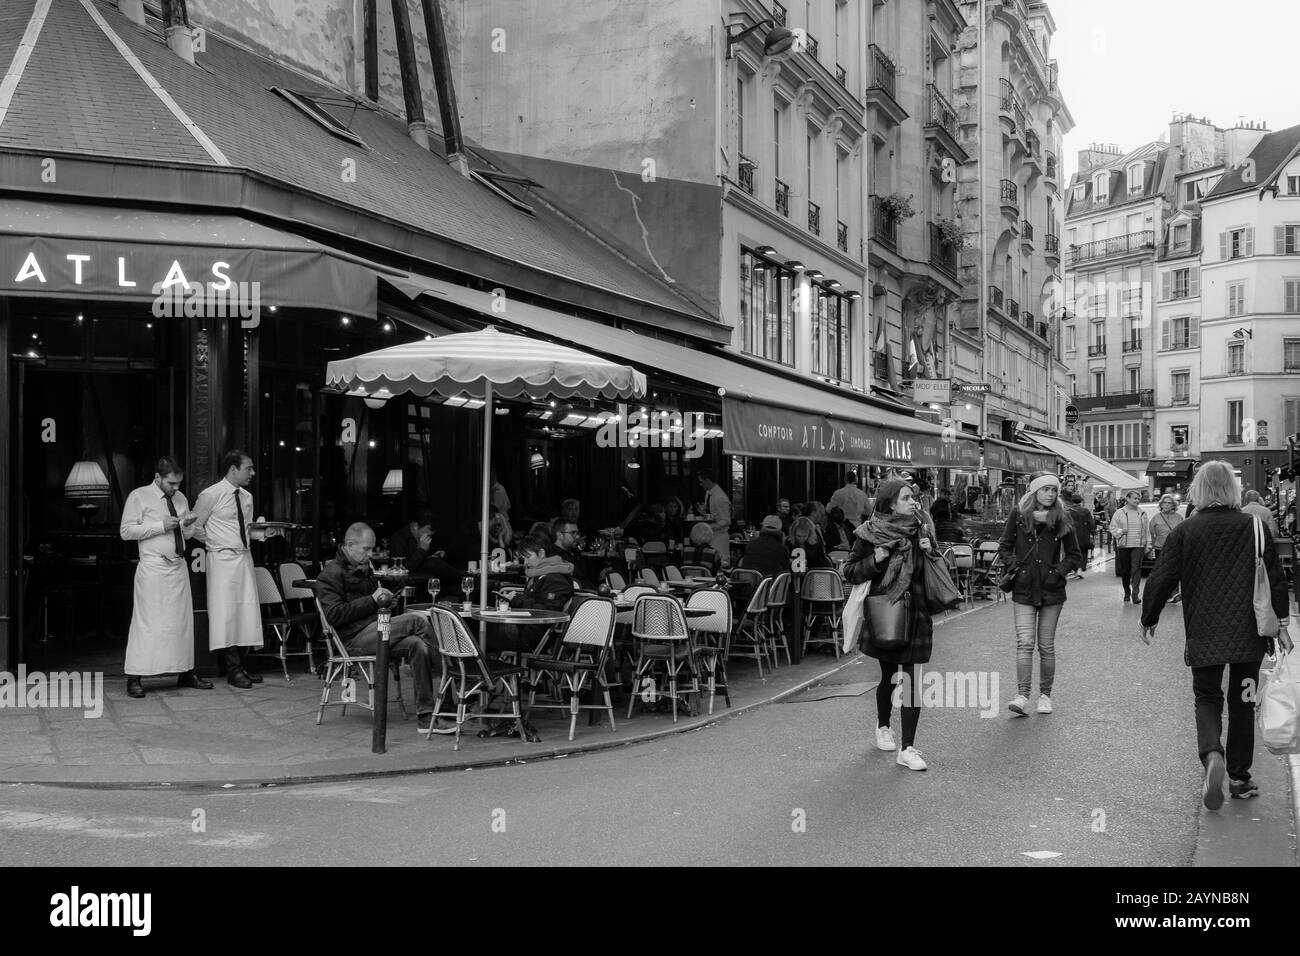 A black and white street scene in Paris with locals sitting outside at a restaurant and people walking through the street Stock Photo